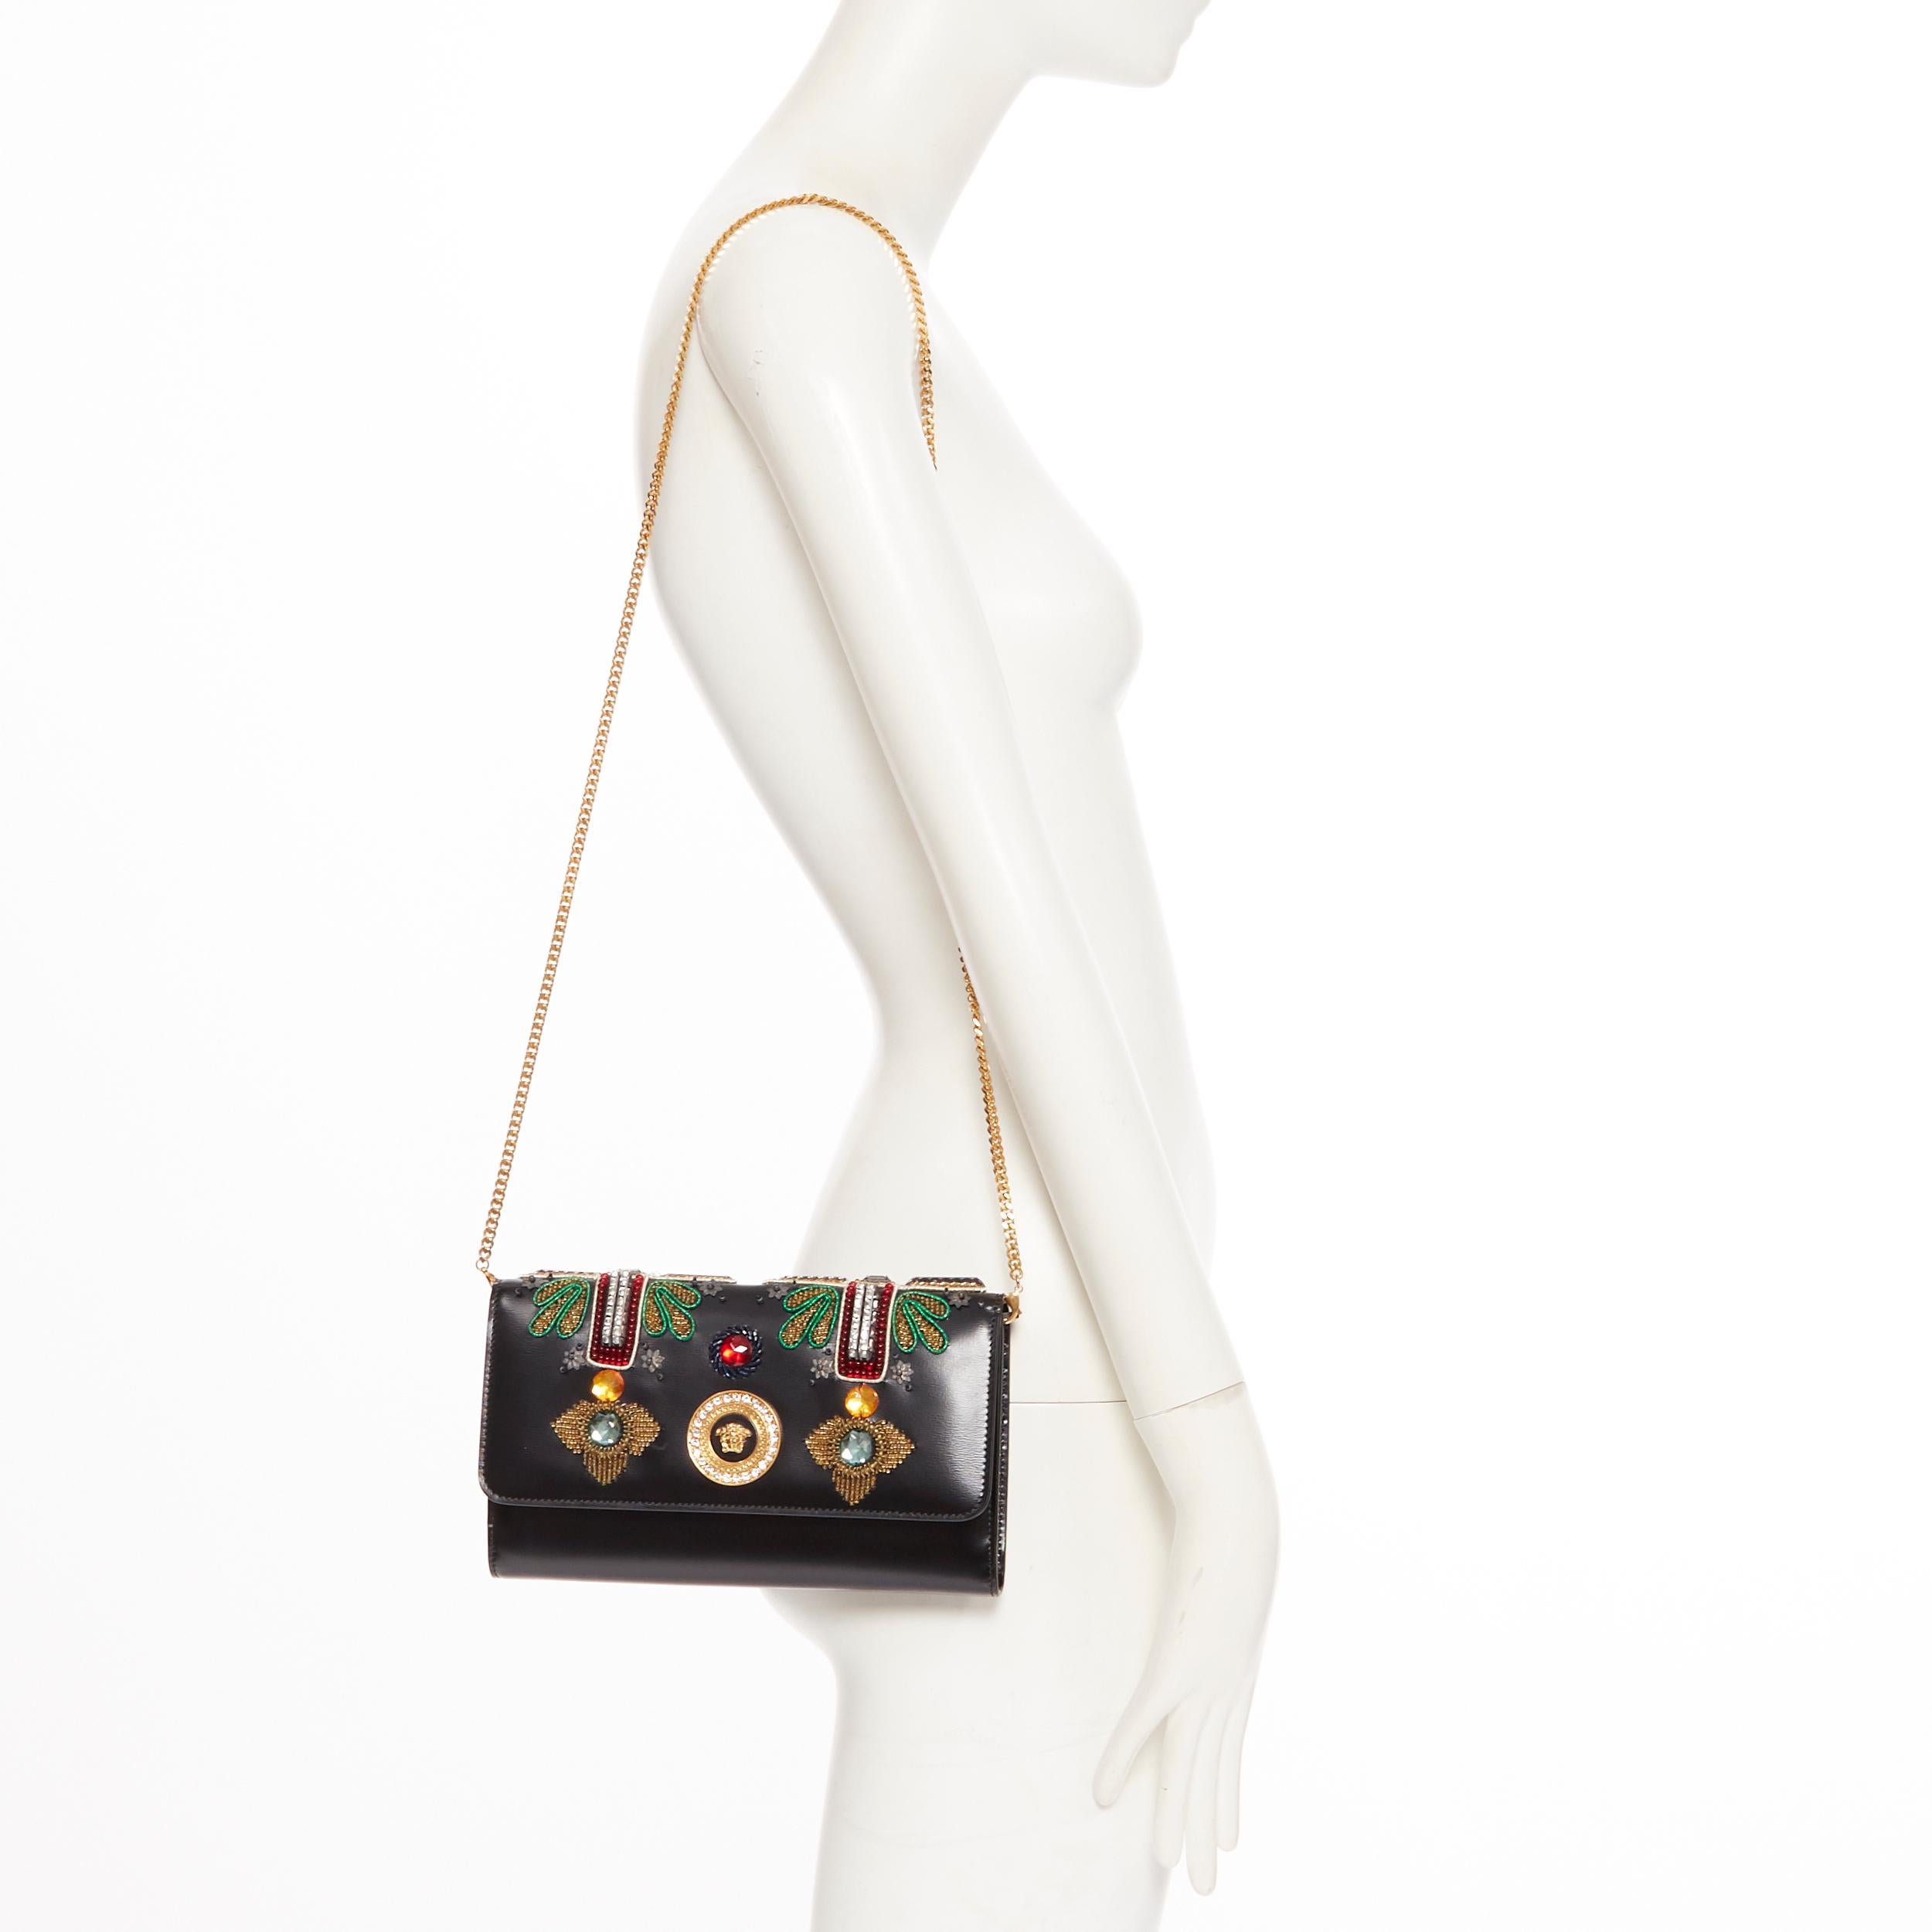 new VERSACE Runway black leather Byzantium Cross embellished wallet on chain bag
Brand: Versace
Designer: Donatella Versace
Collection: Spring Summer 2018
Model Name / Style: Byzantine Cross clutch
Material: Leather; calfskin leather
Color: Black;